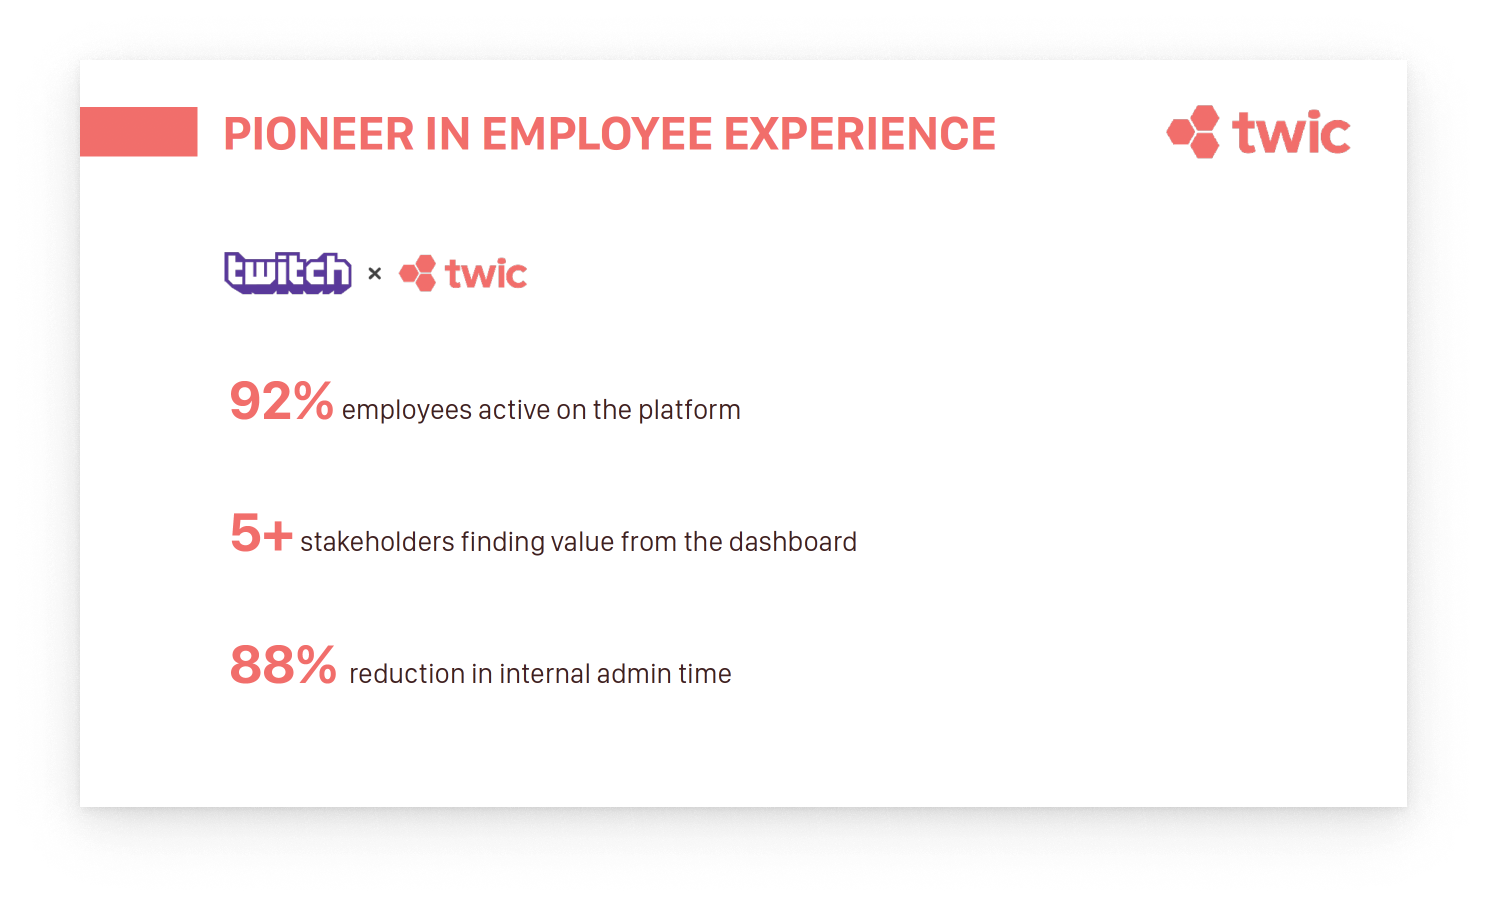 A slide from Twic’s pitch deck with text: “Pioneer in employee experience,” showing the Twitch and Twic logos together, followed by bullet points: “92% employees active on the platform,” “5+ stakeholders finding value from the dashboard,” and “88% reduction in internal admin time.”